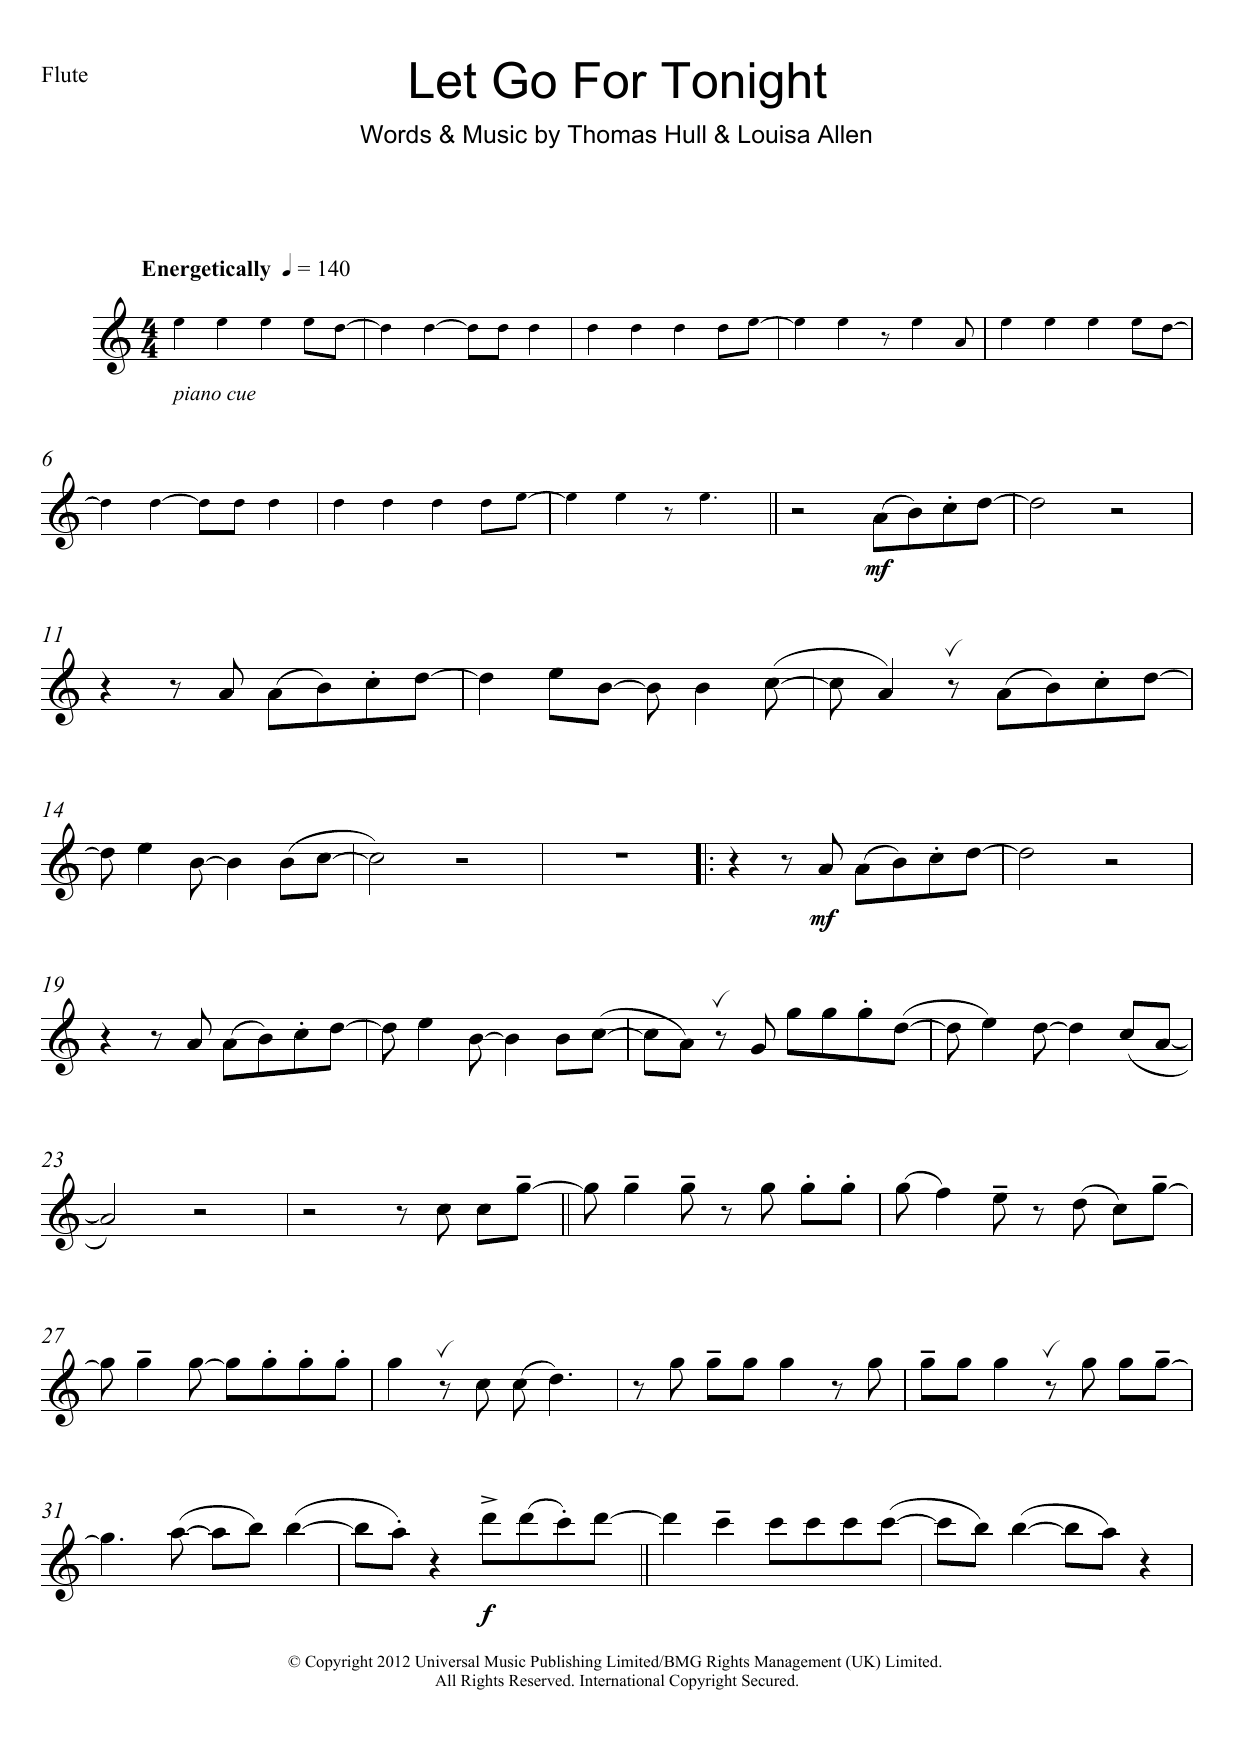 Download Foxes Let Go For Tonight Sheet Music